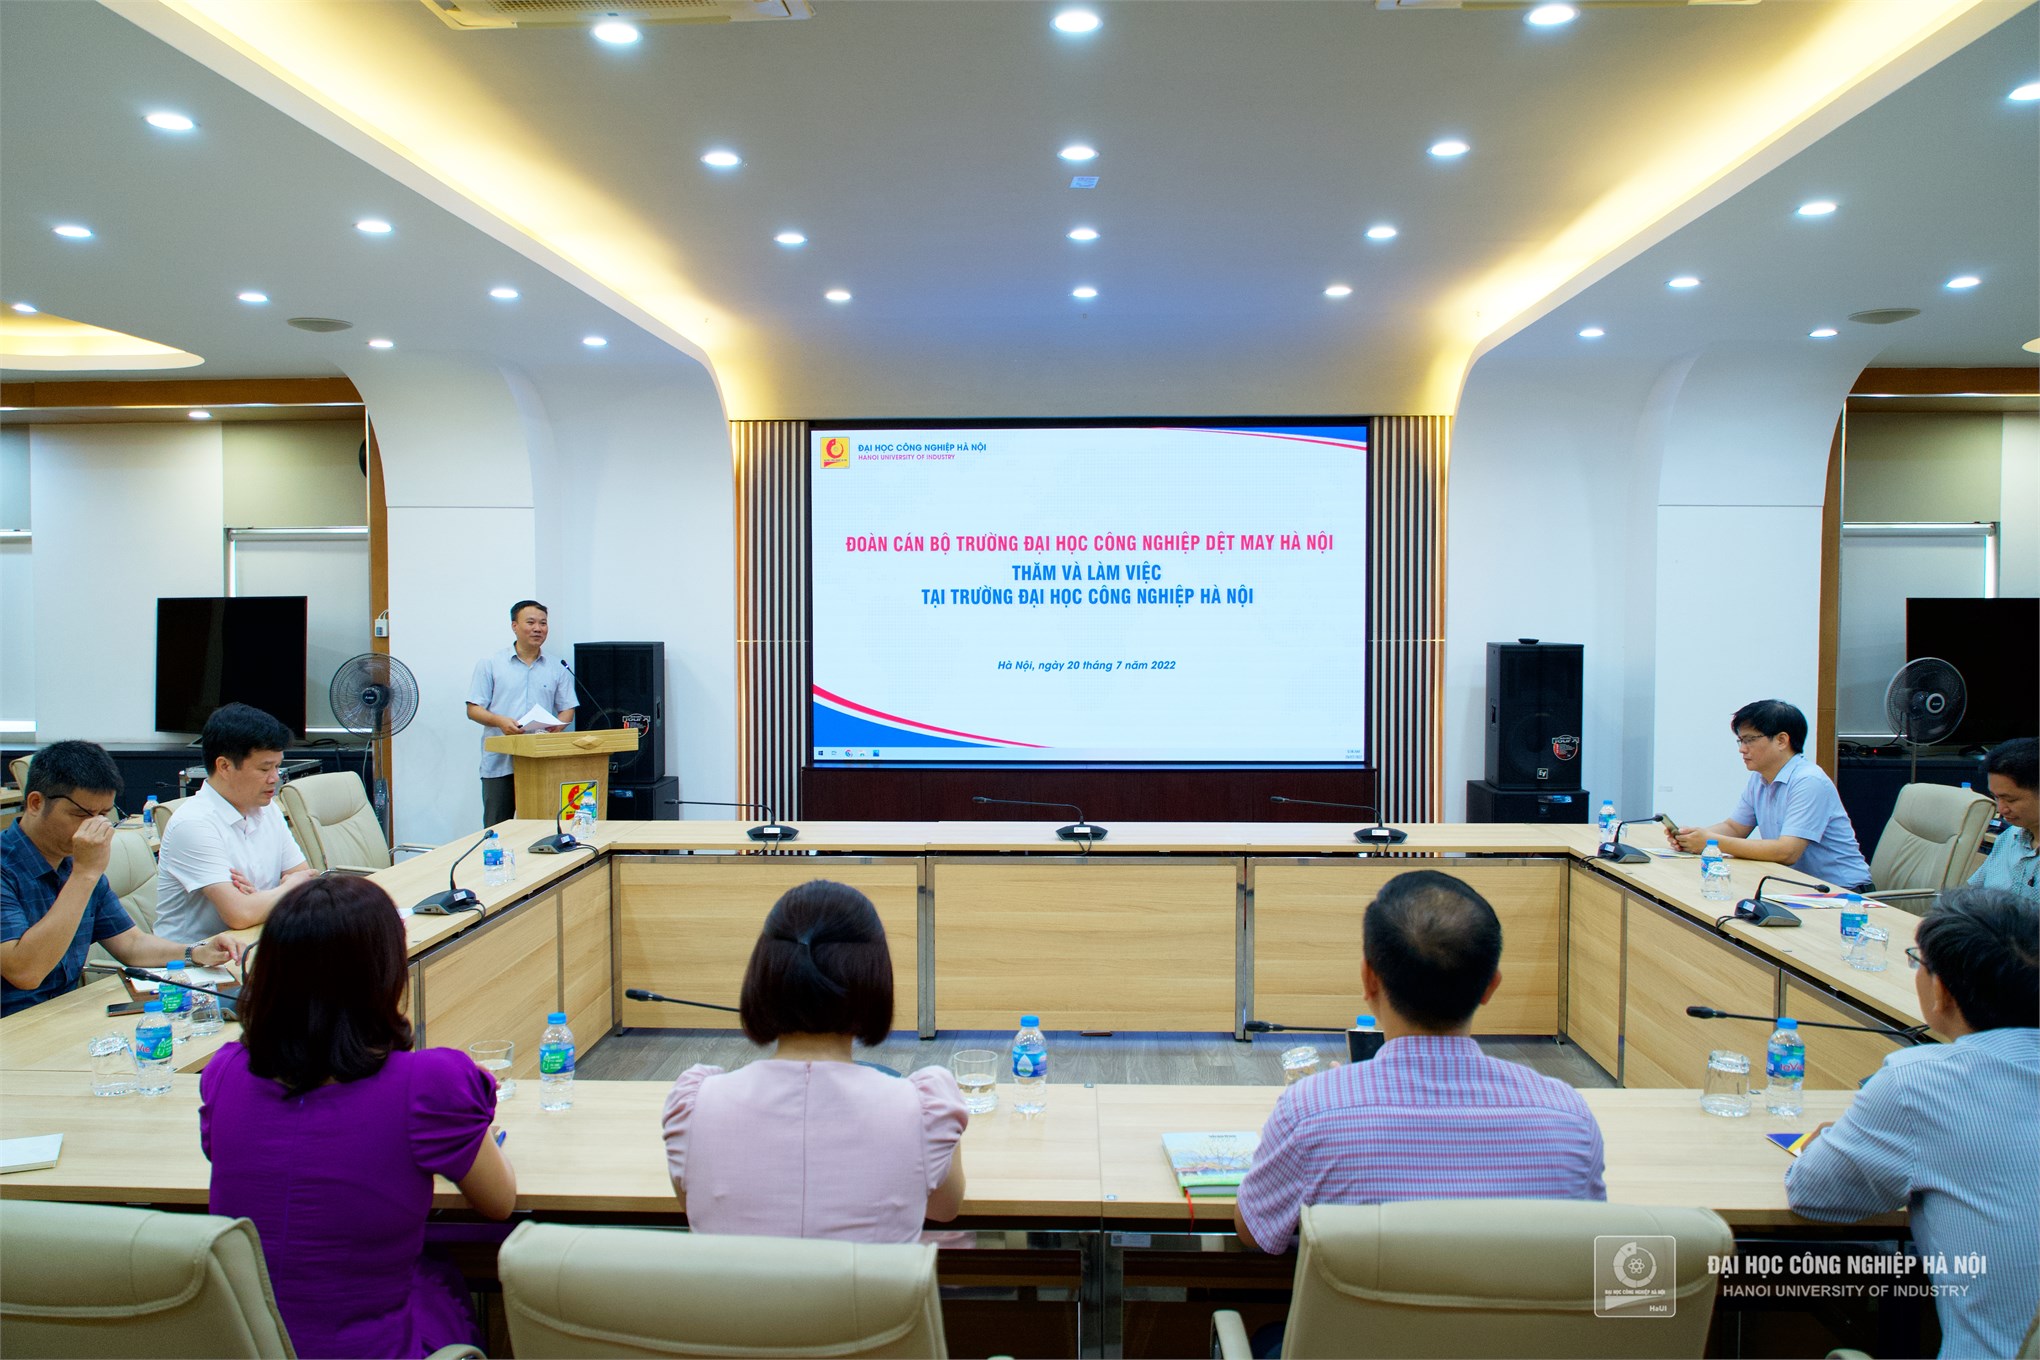 Delegations of Hanoi Industrial Textile Garment University paid a working visit to Hanoi University of Industry